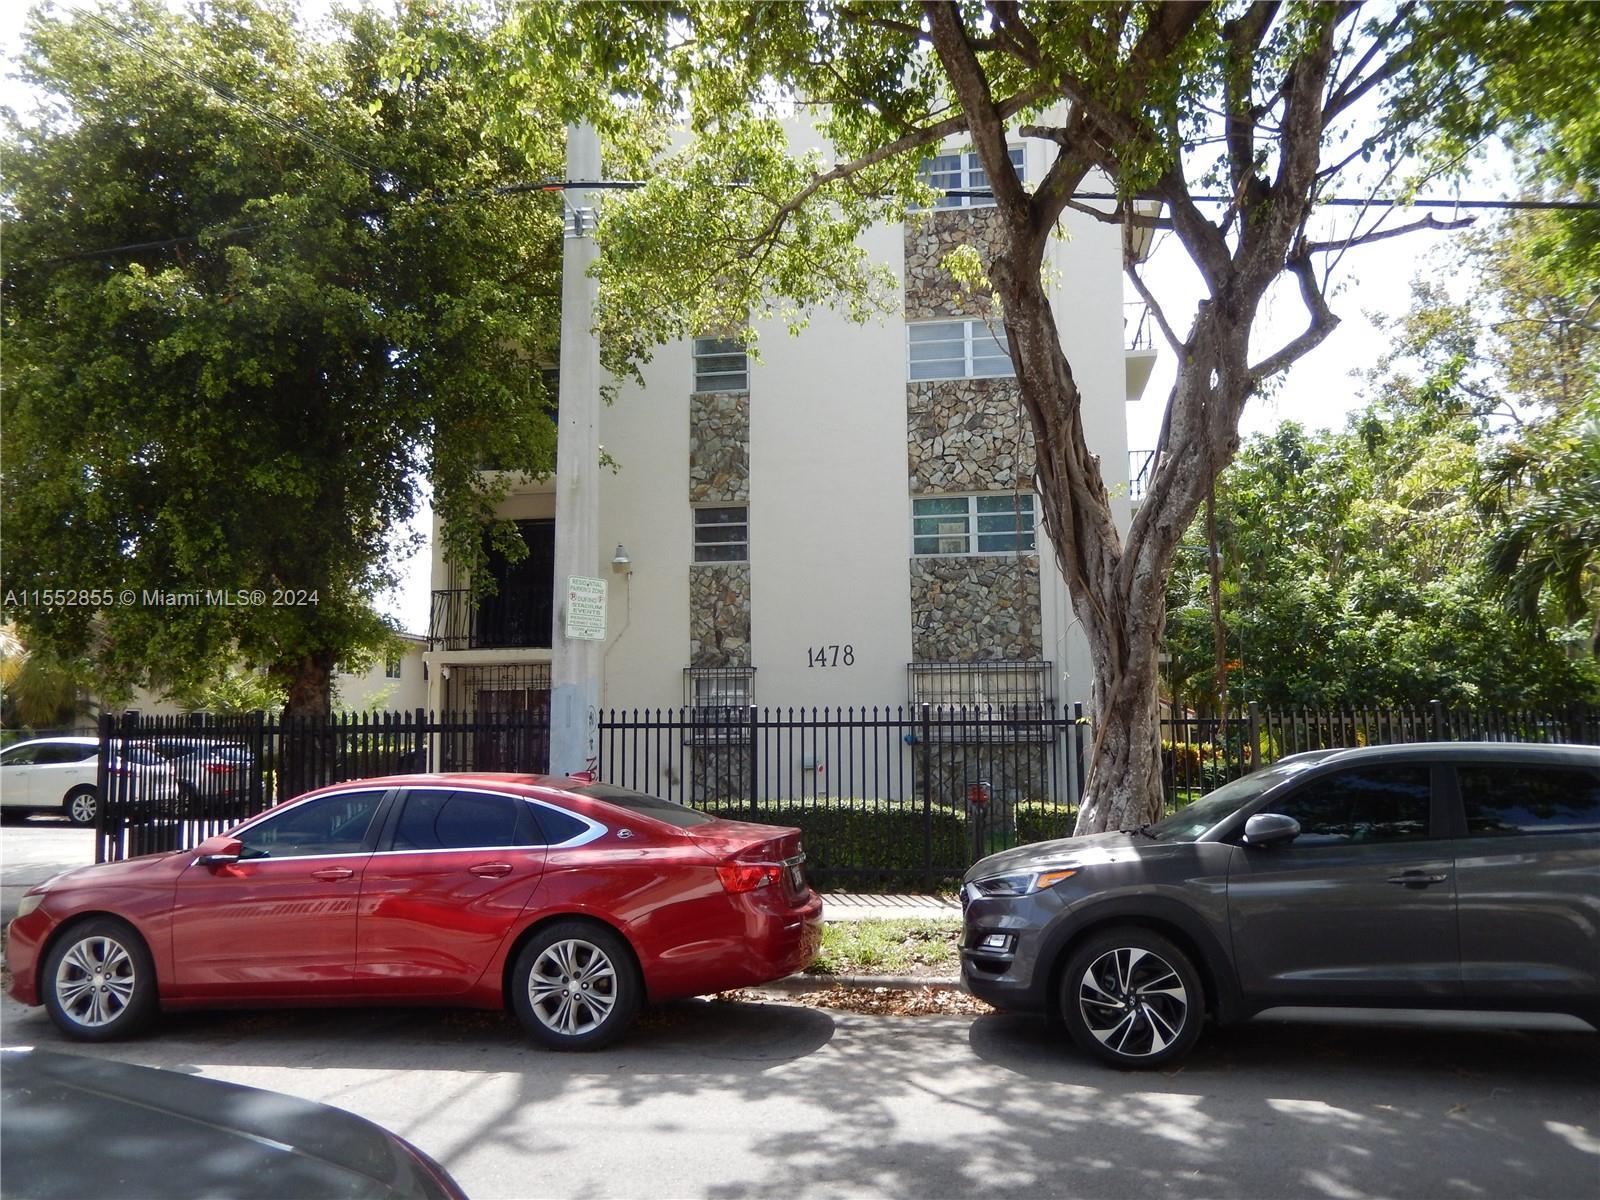 Photo of 1478 NW 1st St #204 in Miami, FL